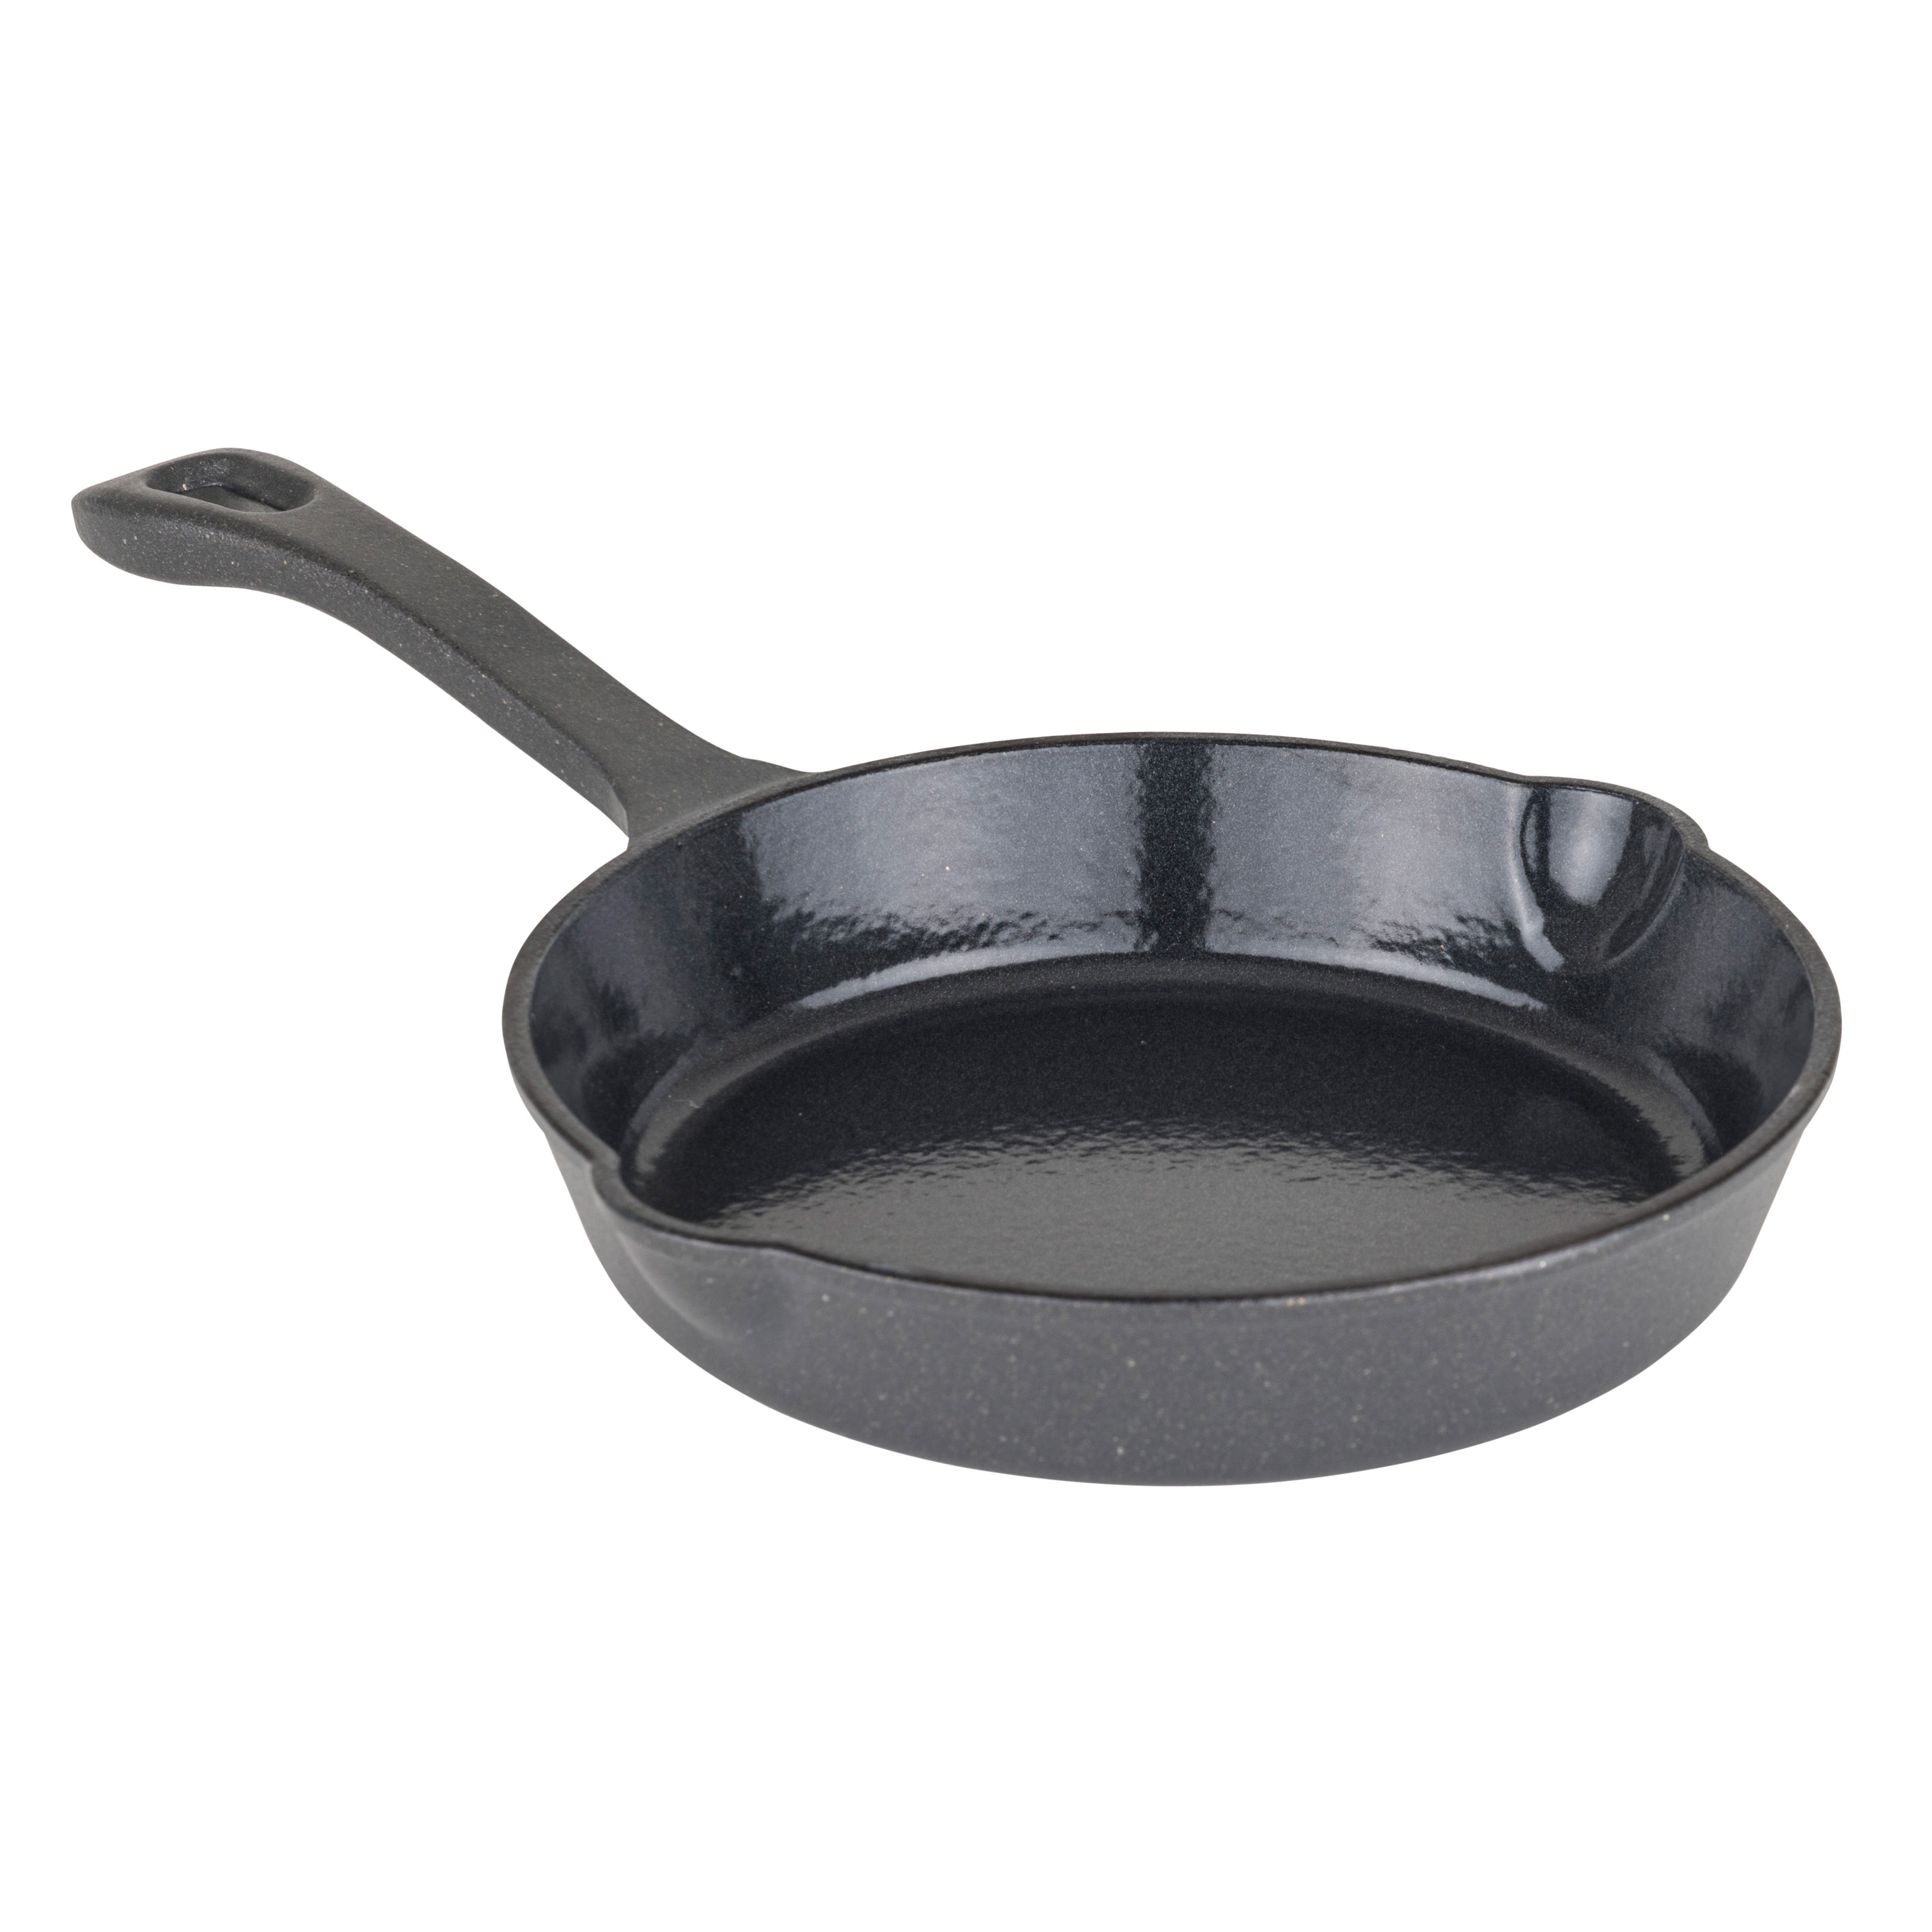 https://ak1.ostkcdn.com/images/products/is/images/direct/a7eedd5ae60ff0d16f36a4651b26b71207fa0fdf/Viking-Cast-Iron-8-inch-Fry-Pan%2C-Charcoal.jpg